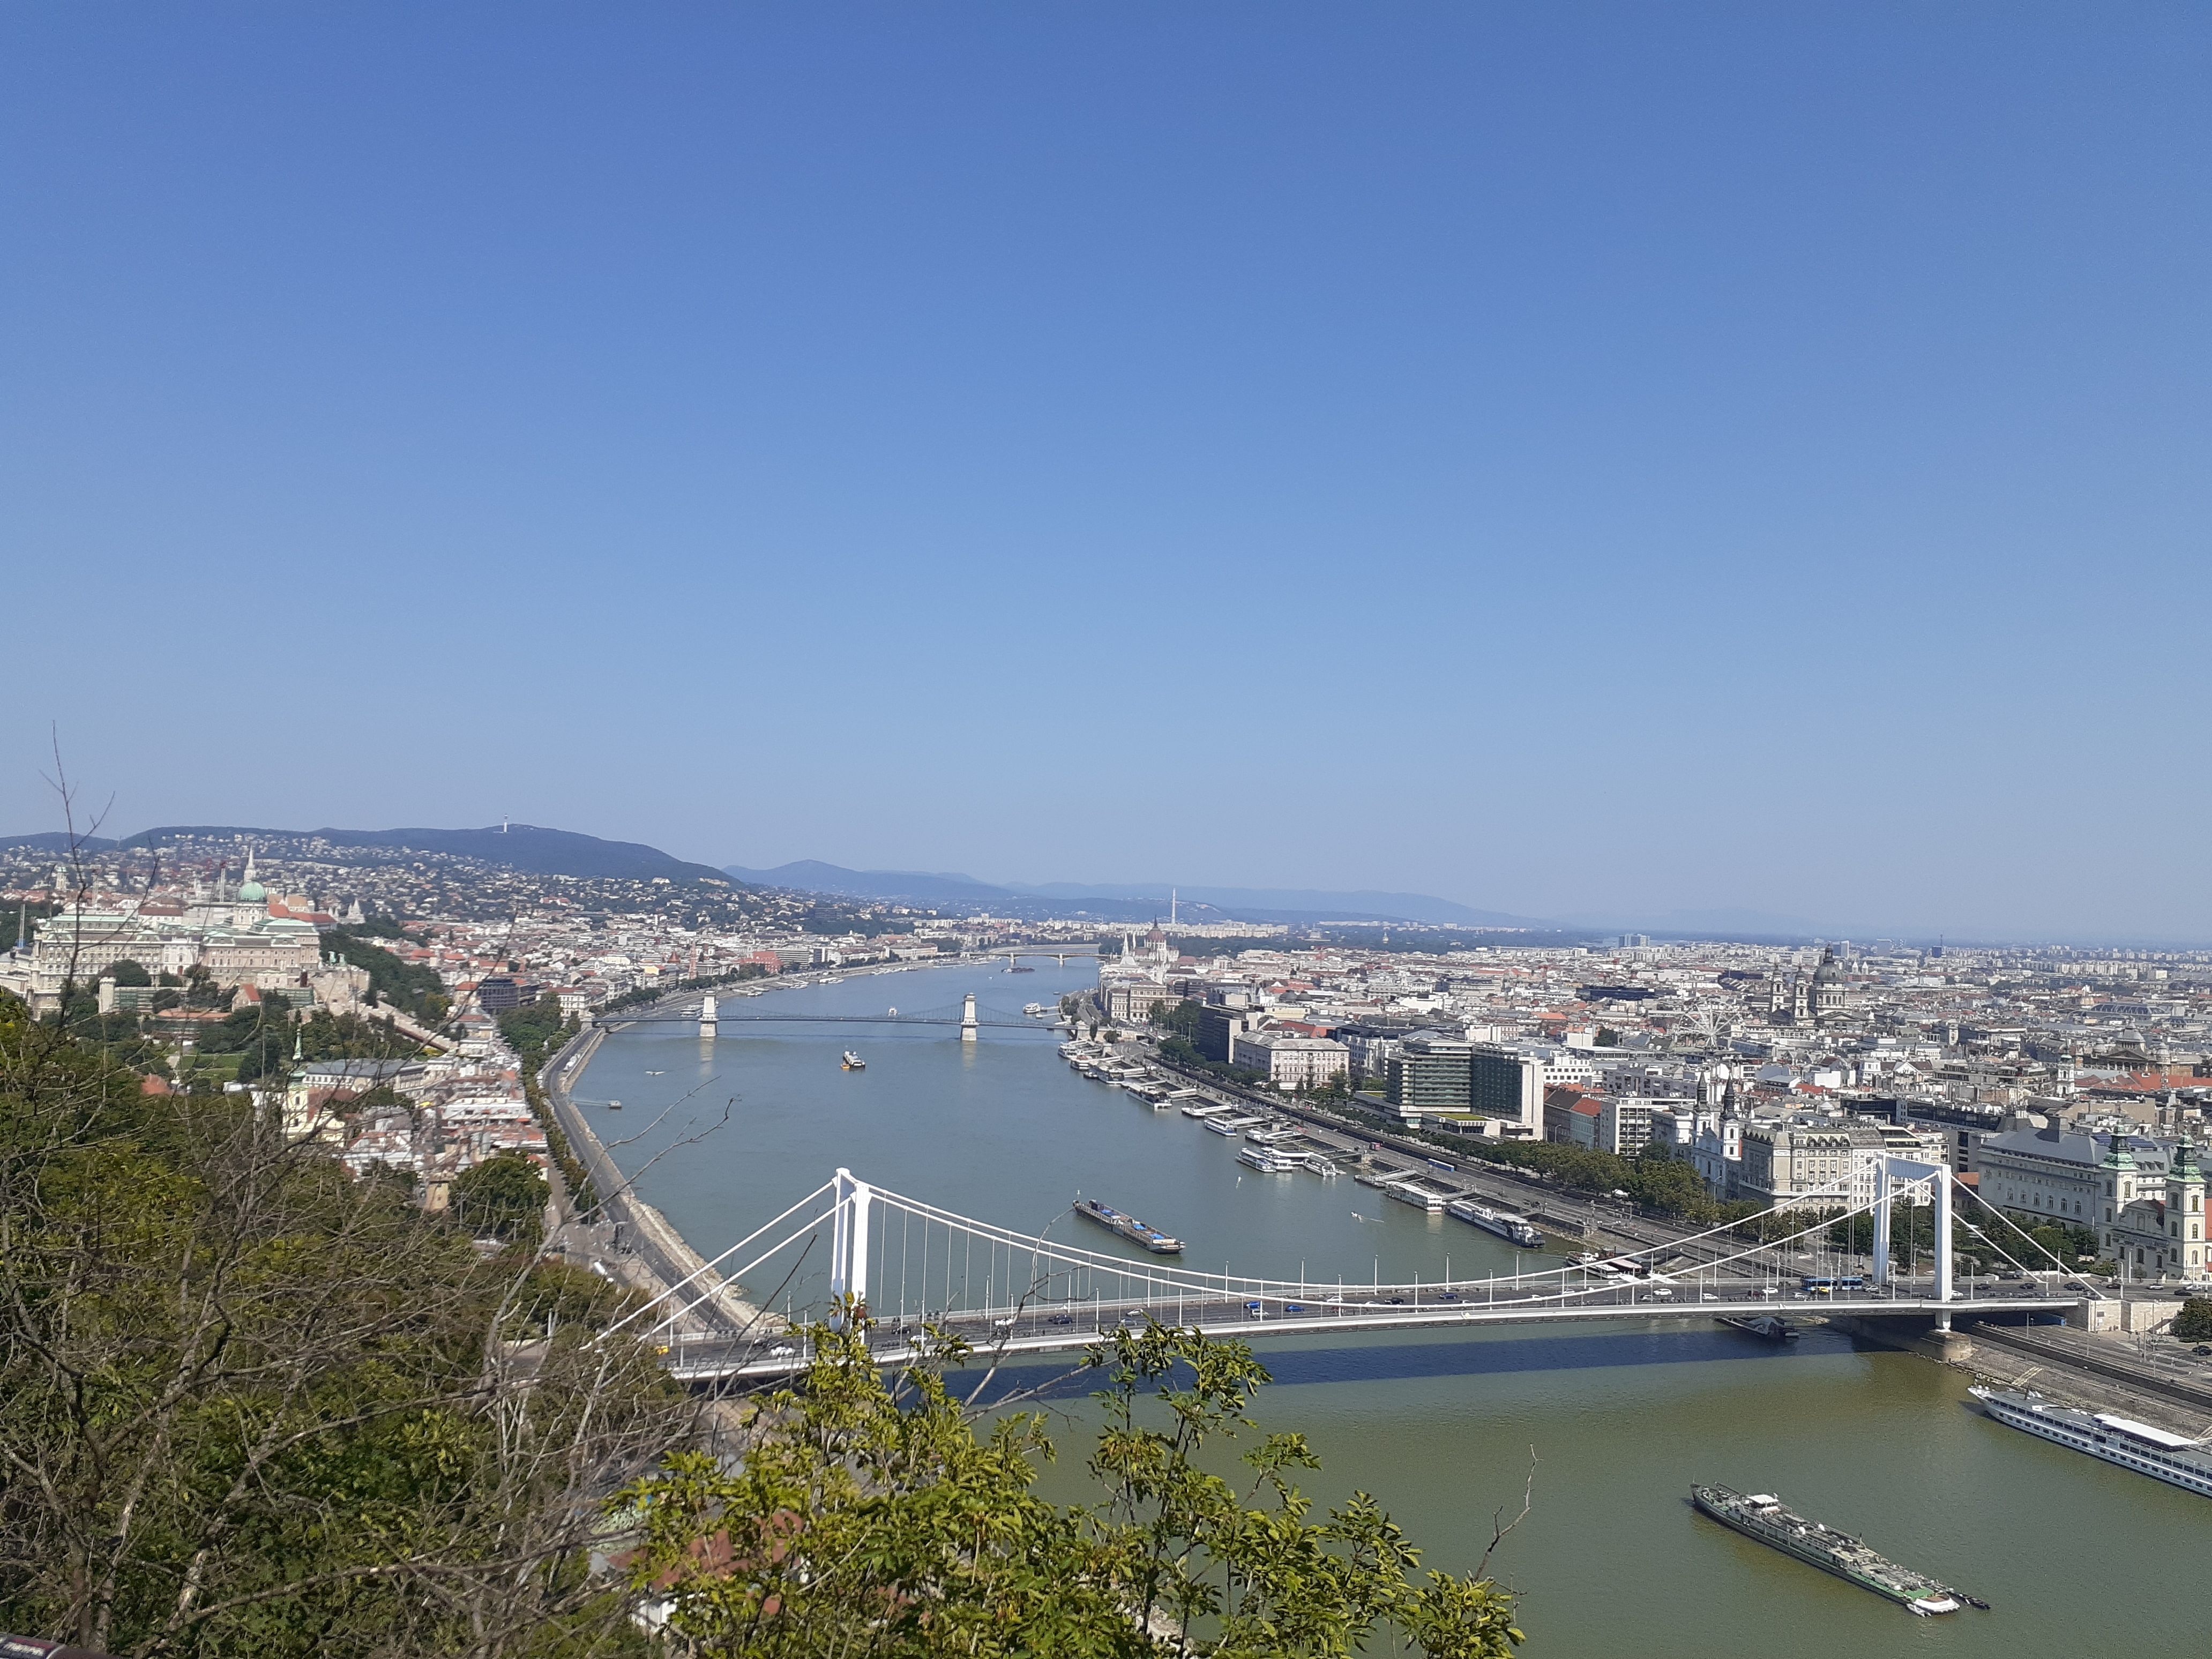 View of the Danube River